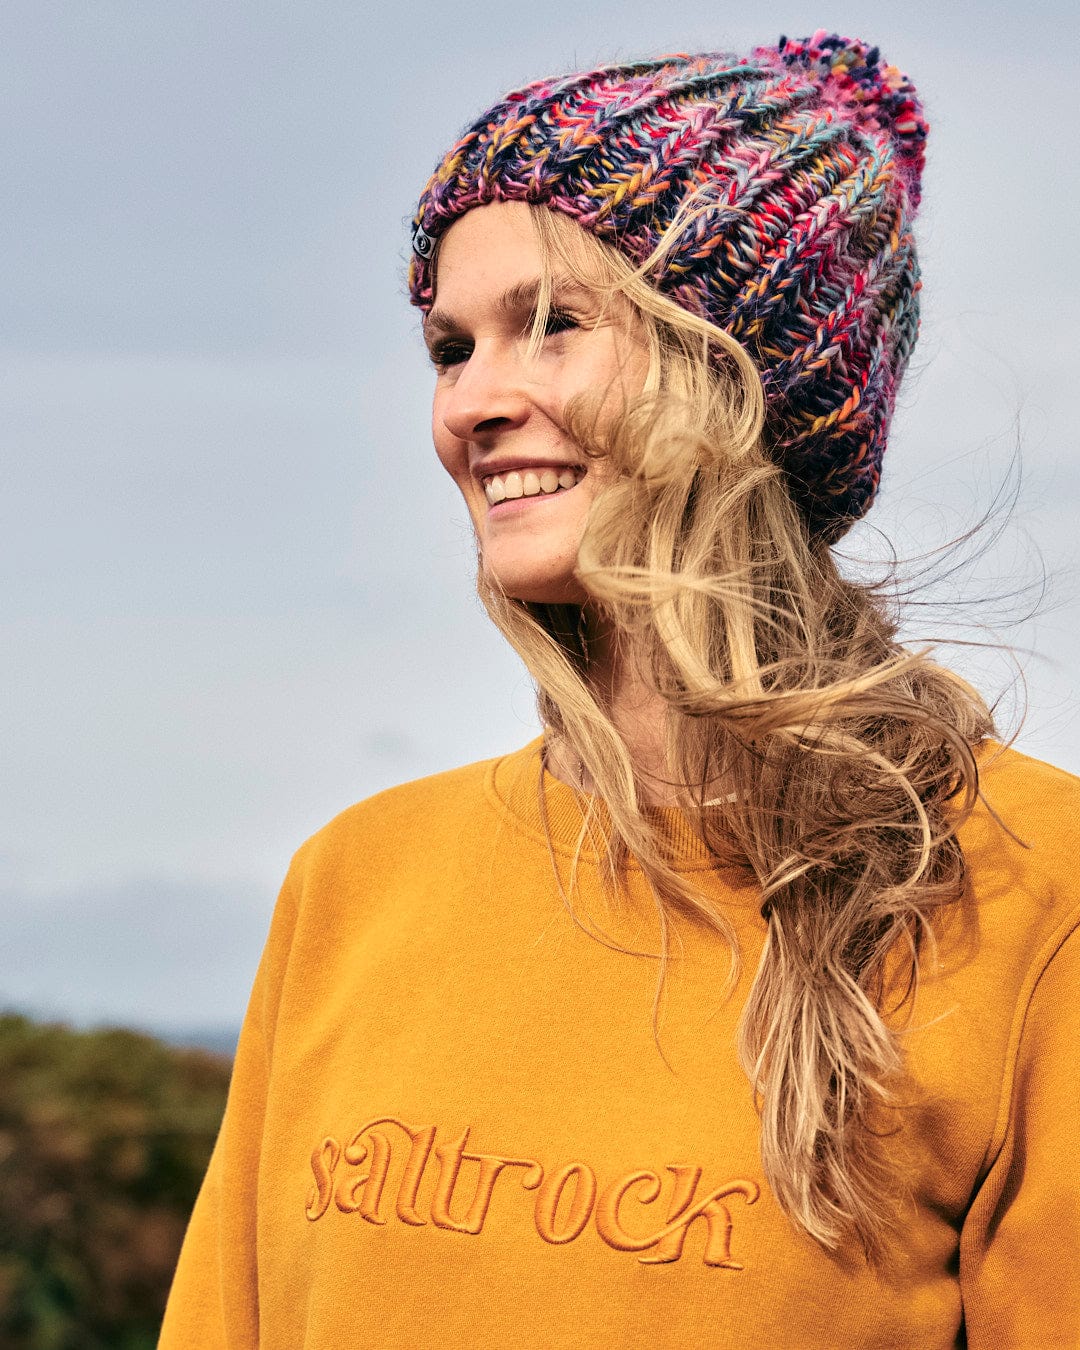 A blonde woman wearing a colorful knitted Celeste - Womens Sweat - Yellow hat made from a cotton-polyester blend fabric. (Brand Name: Saltrock)